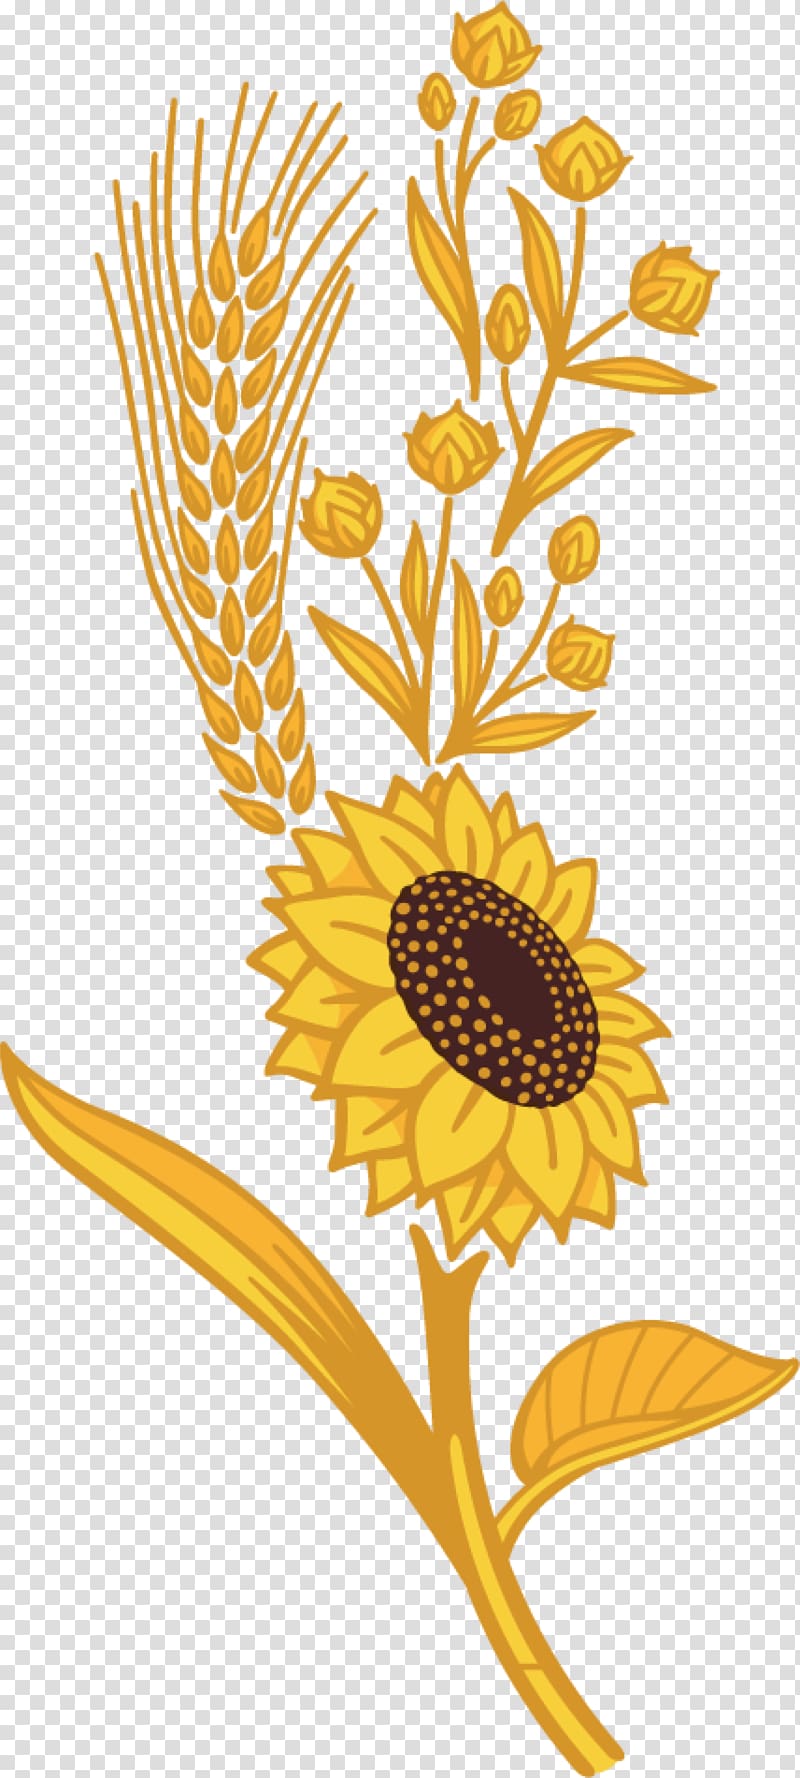 Khorasan wheat Triticale Sunflower seed Whole grain, bagel transparent background PNG clipart